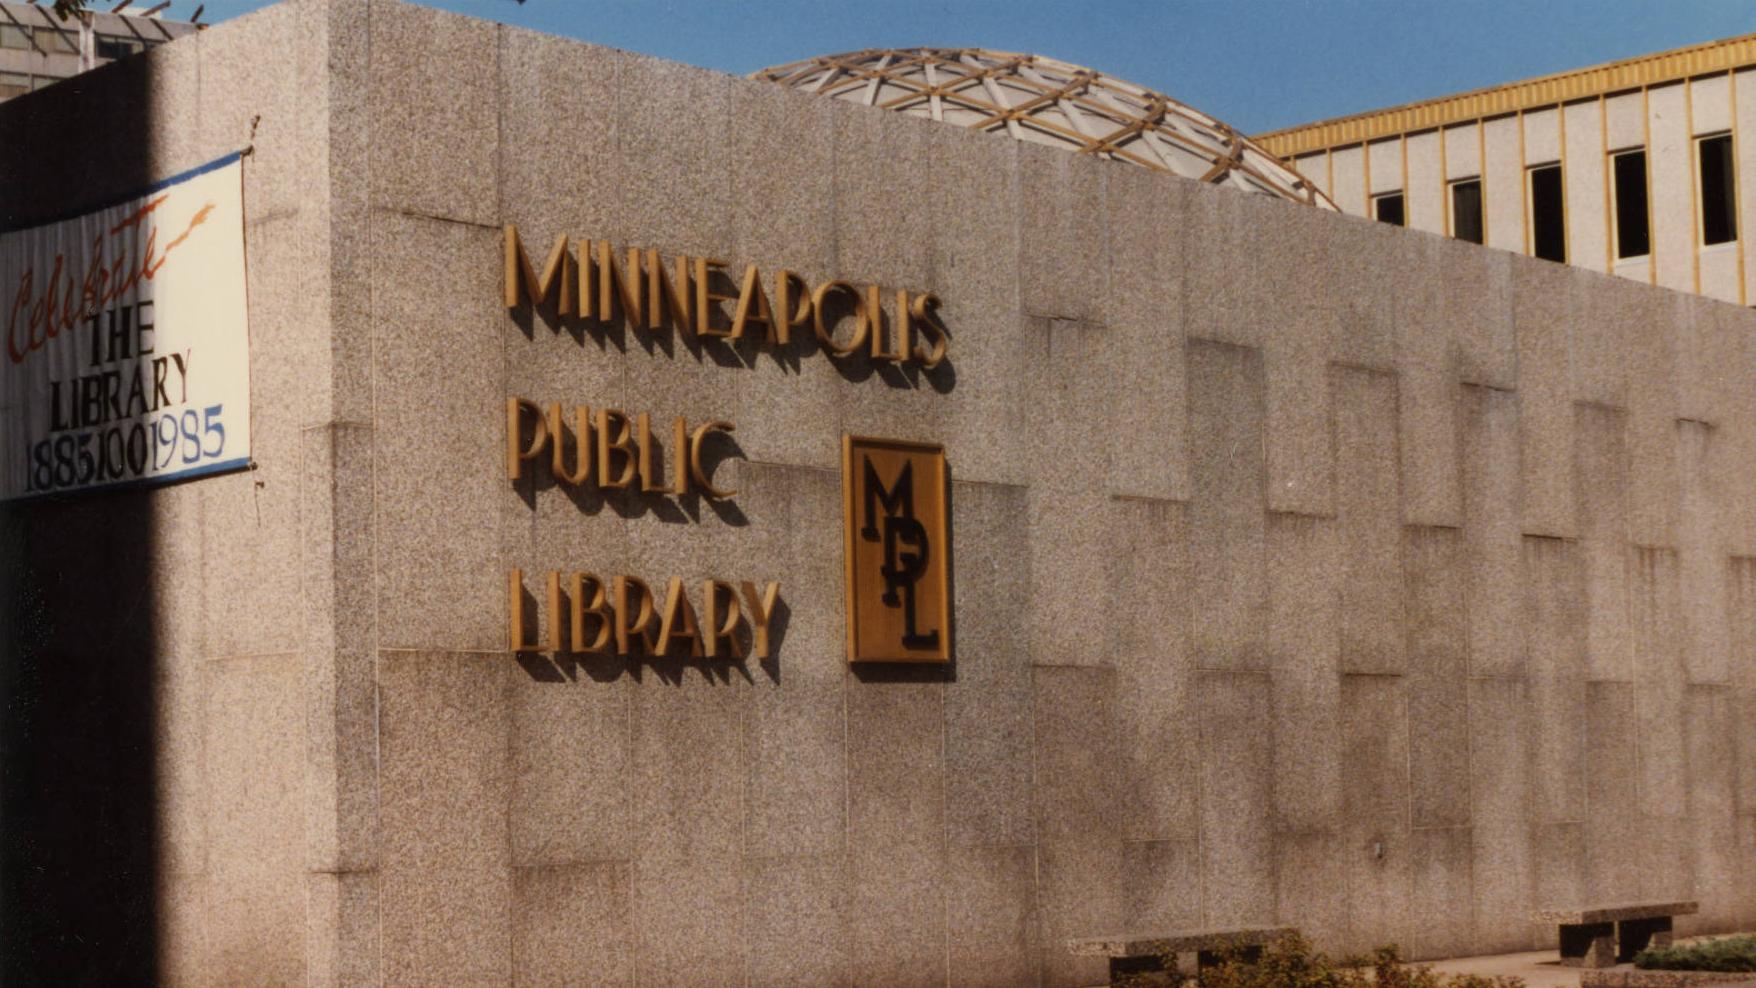 A 1985 photograph of the exterior of the Minneapolis Central Library.